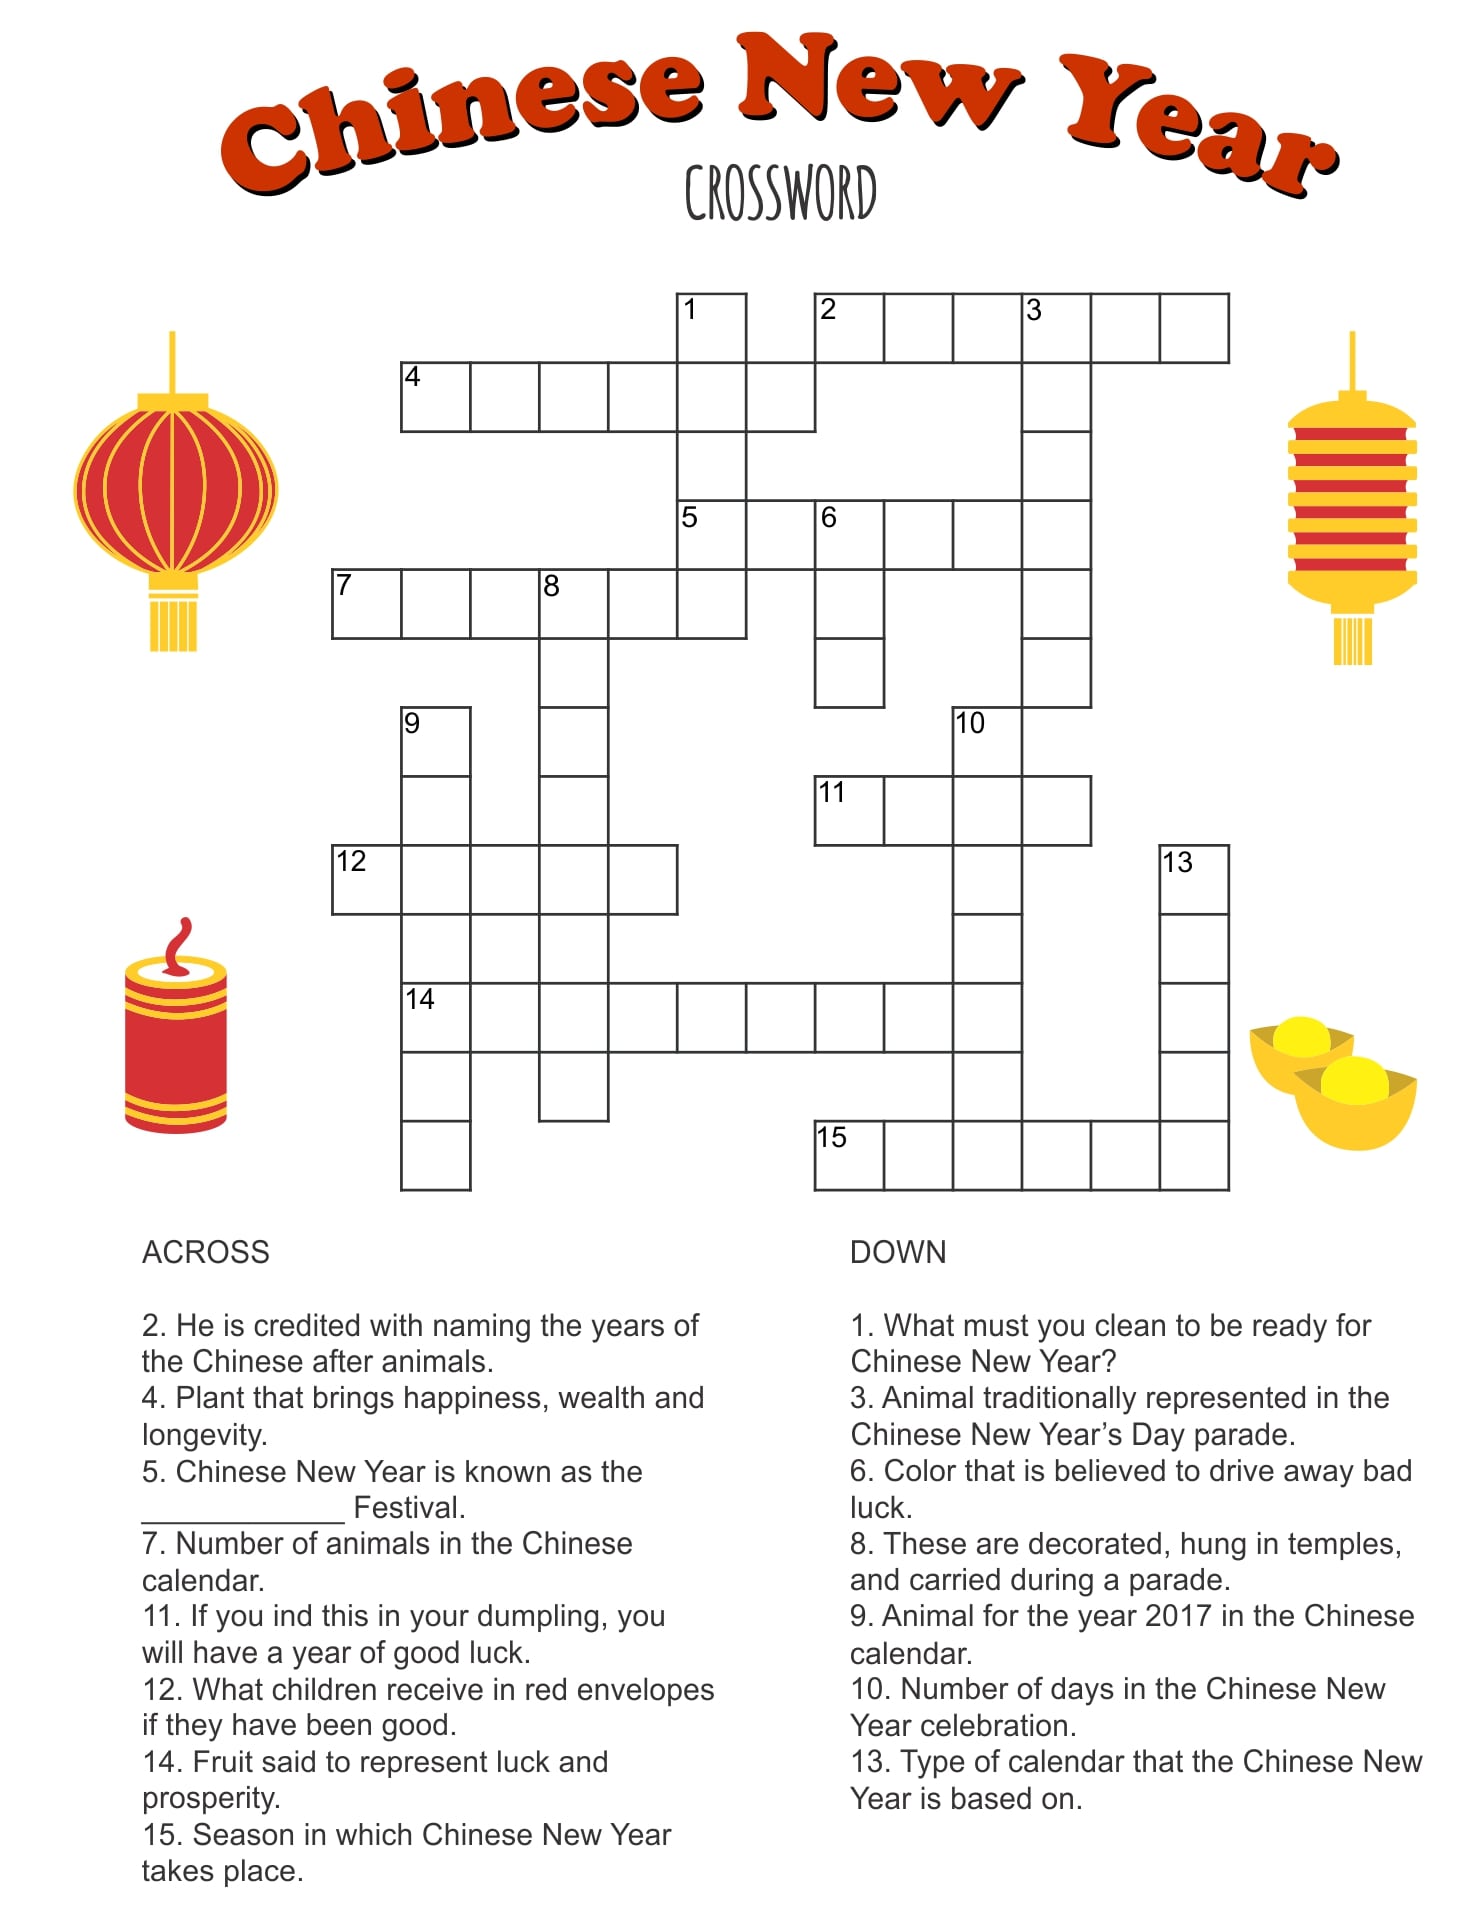 Easy Printable Crosswords With Answers_84203